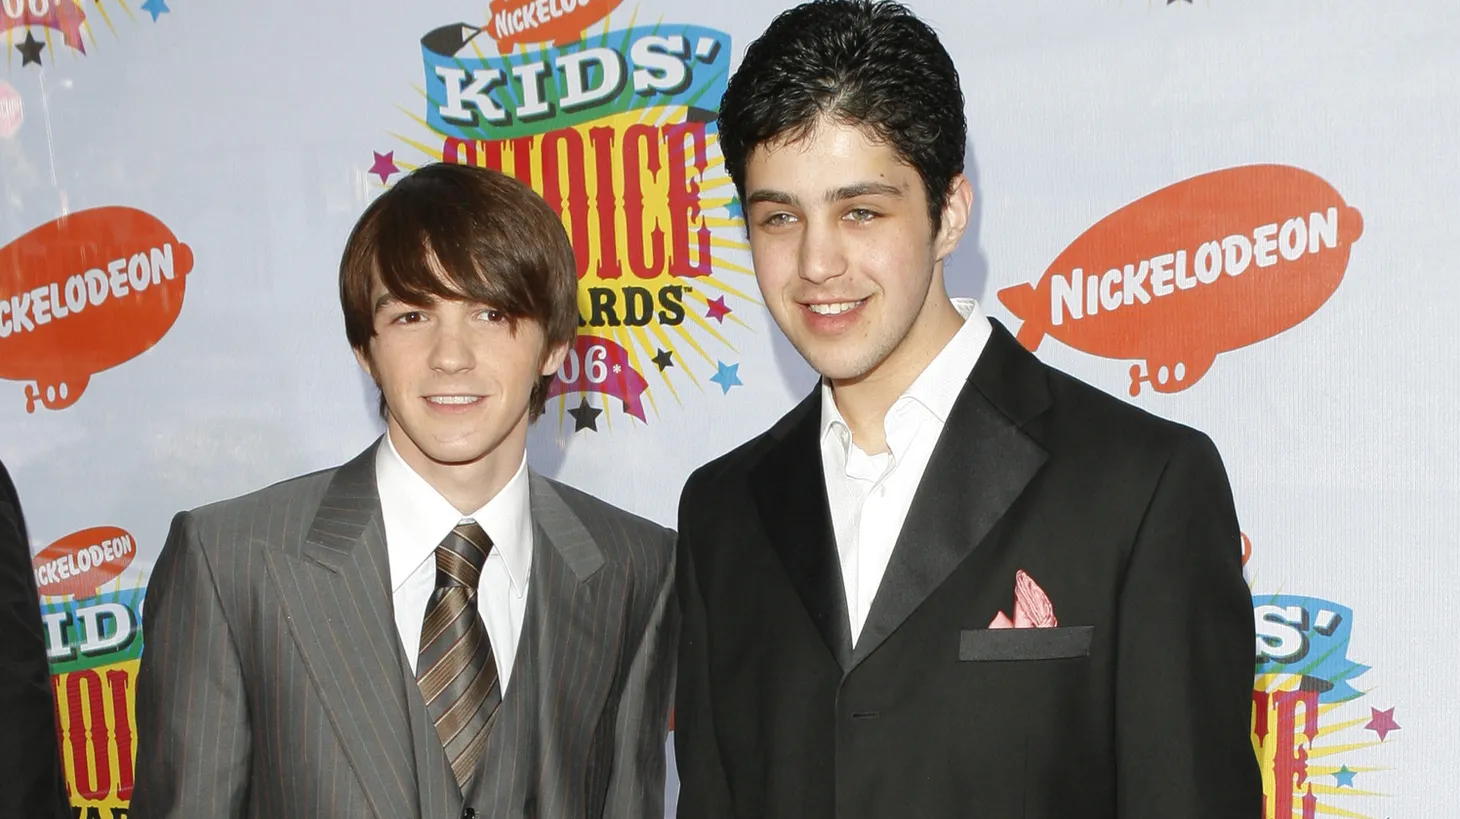 Drake Bell, pictured here with “Drake and Josh” co-star Josh Peck at the Nickelodeon Kid’s Choice Awards in 2006, speaks out about alleged years of abuse on set in the new ID docuseries “Quiet on Set: The Dark Side of Kids TV.”